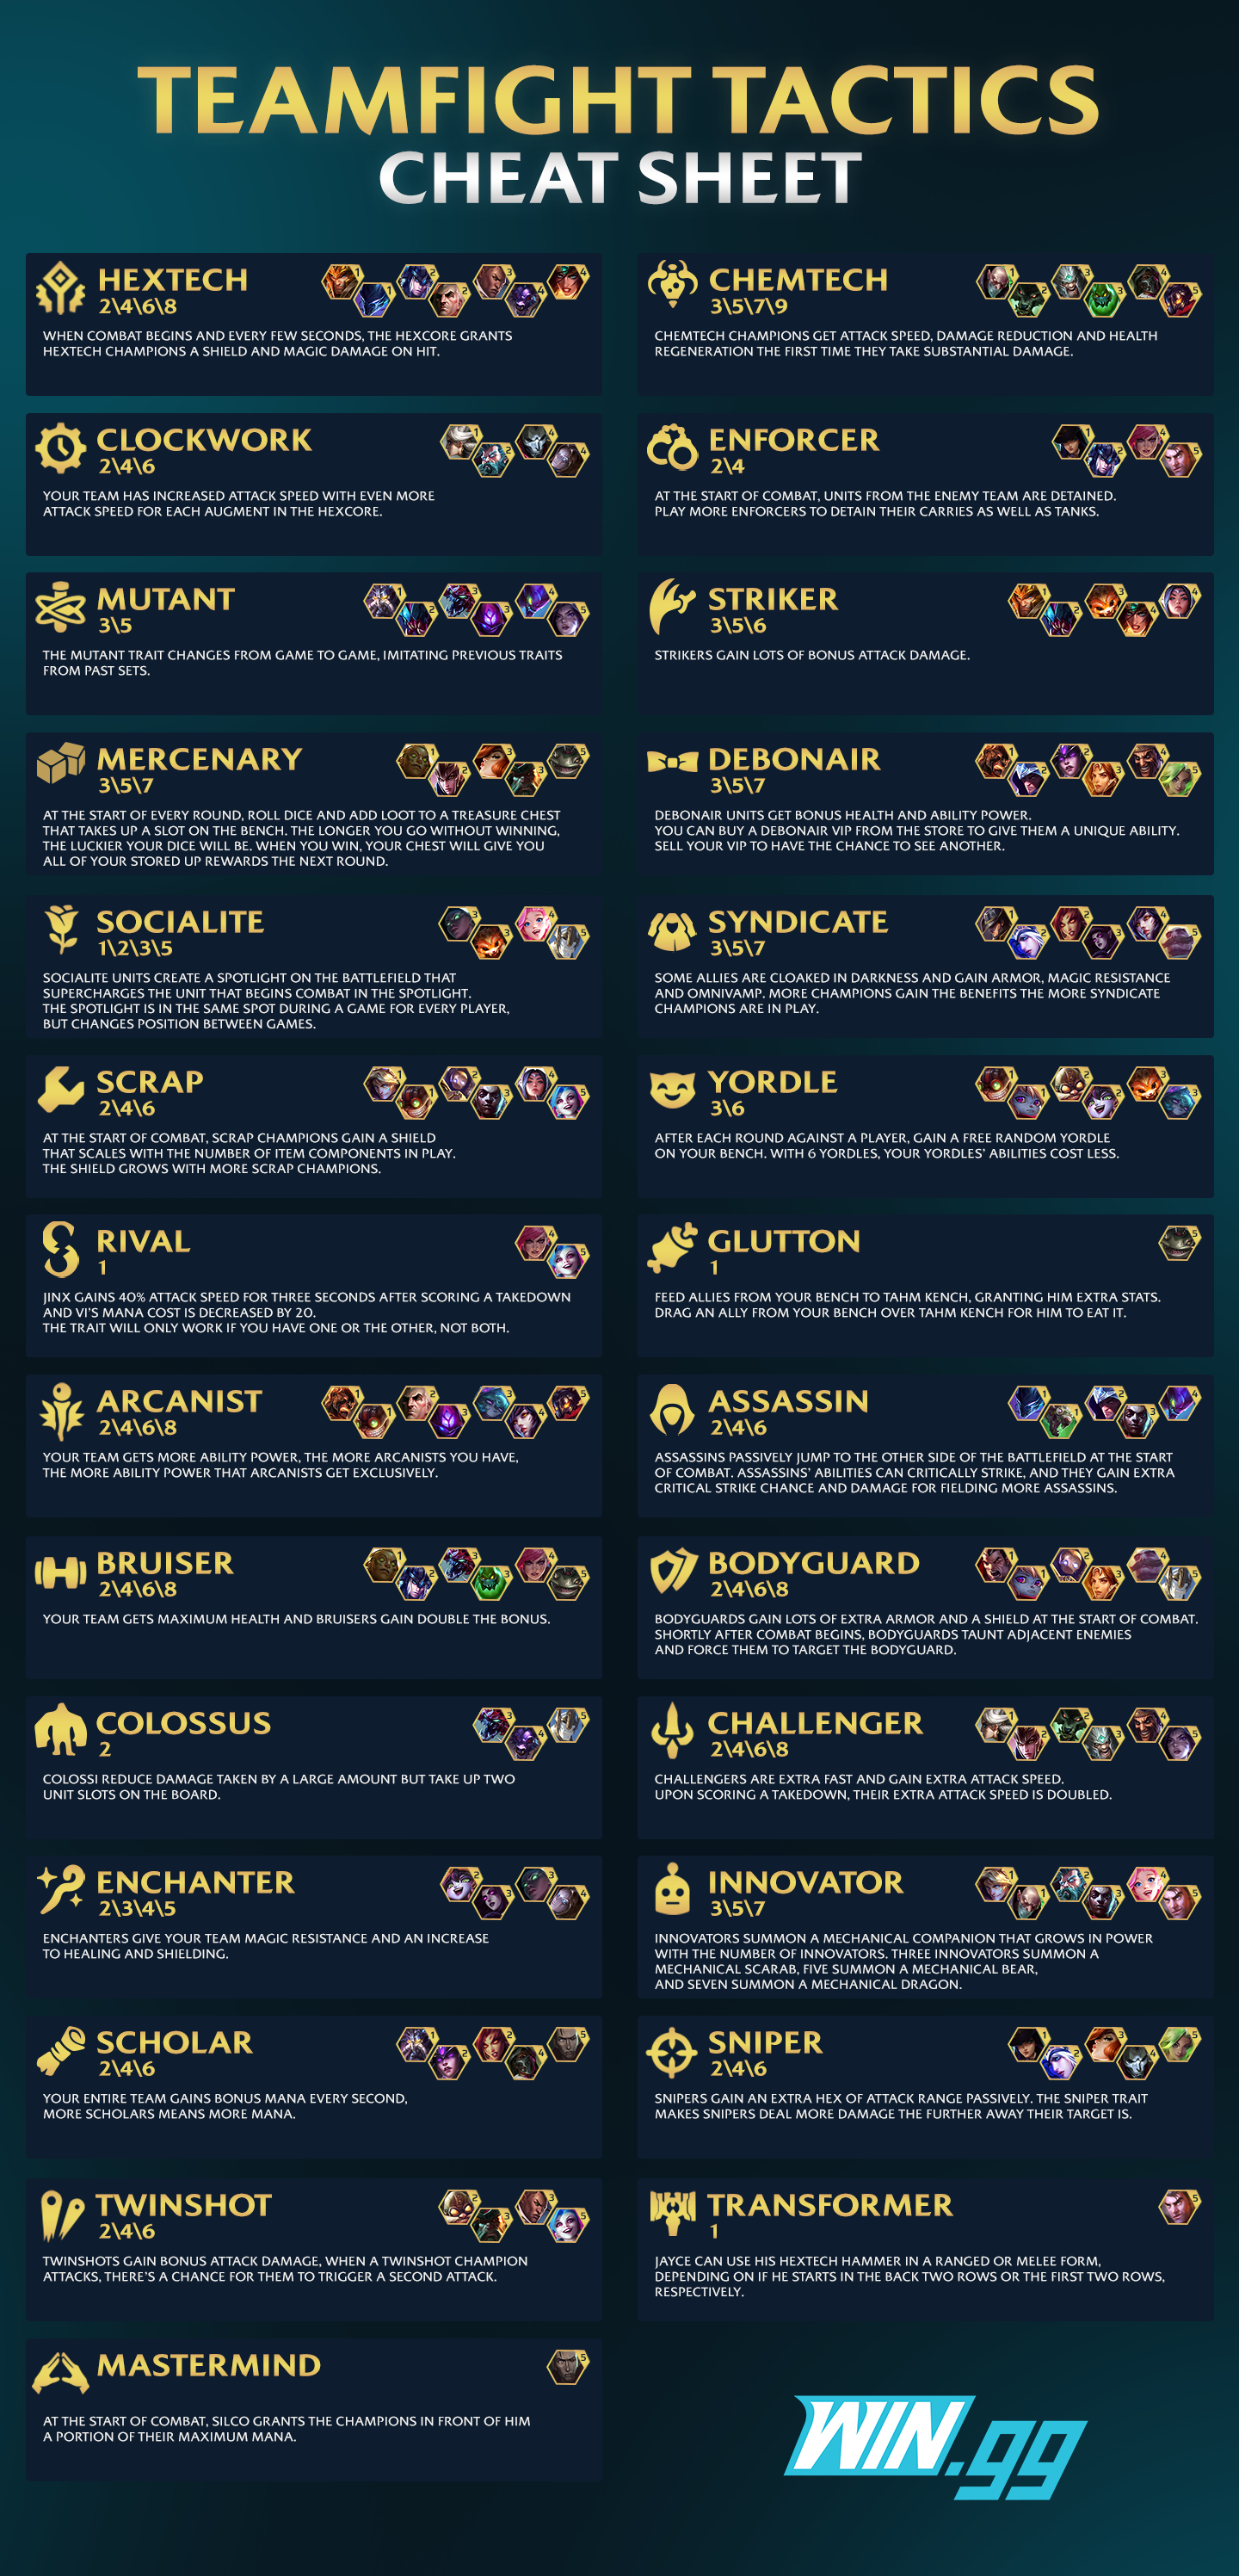 The TFT set 6.5 cheat sheet with all units and traits -